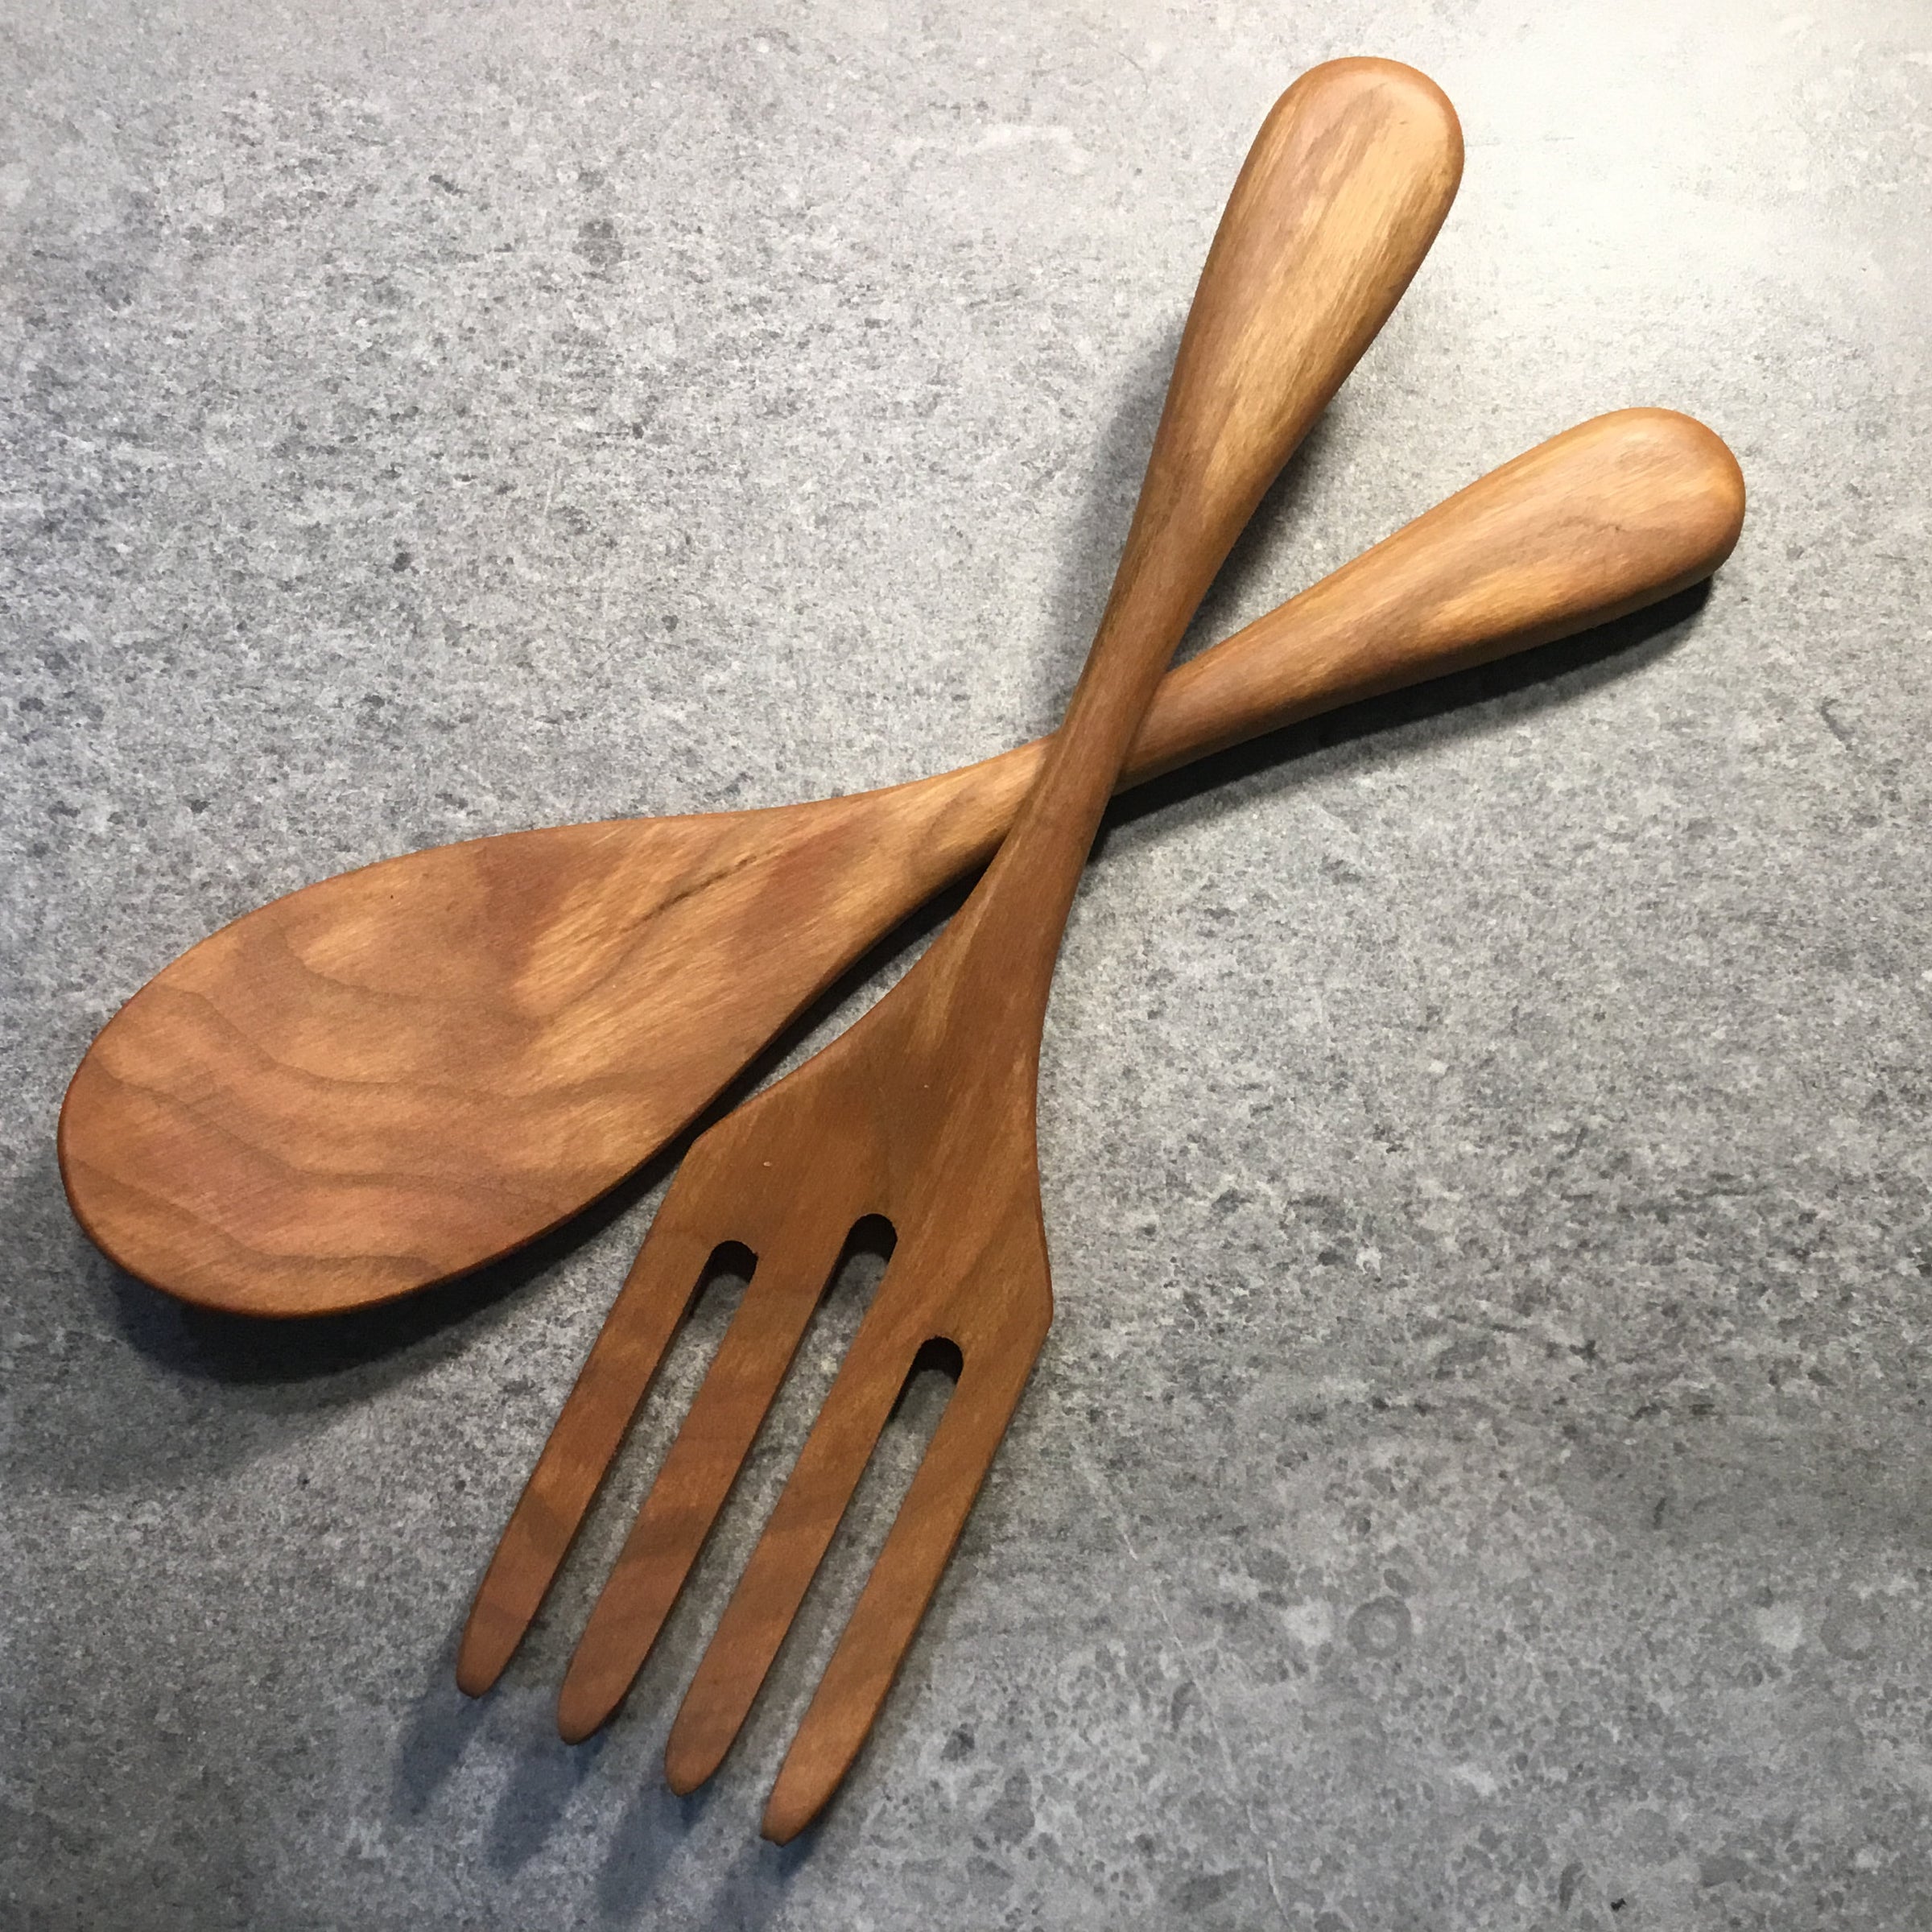 Personalized Wooden Utensils - Chas' Crazy Creations